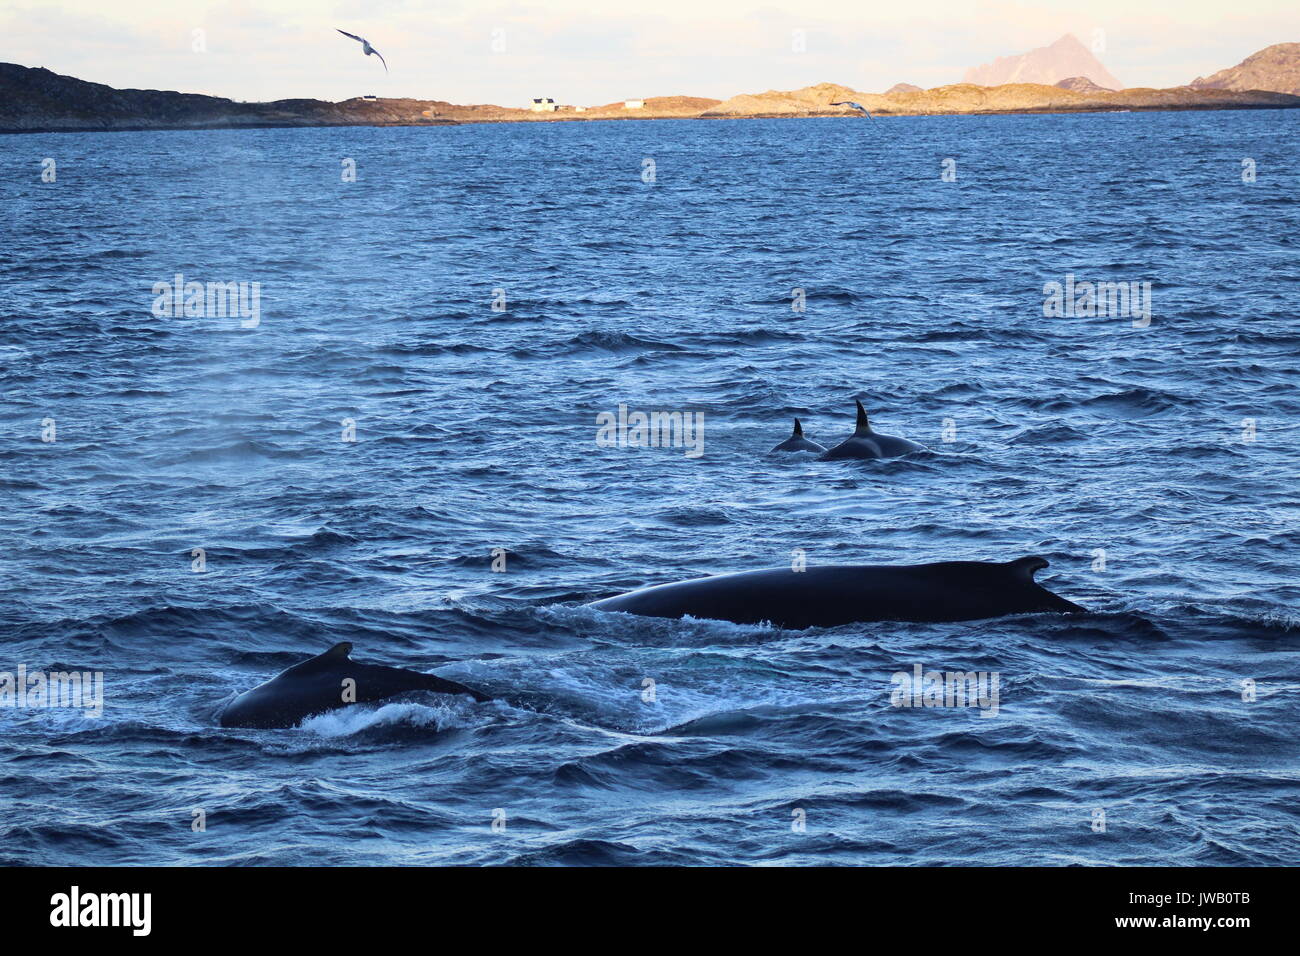 Two humpback whales and a couple of orcas surfacing in fjord by Tromso with mountains and bird flying overhead Stock Photo